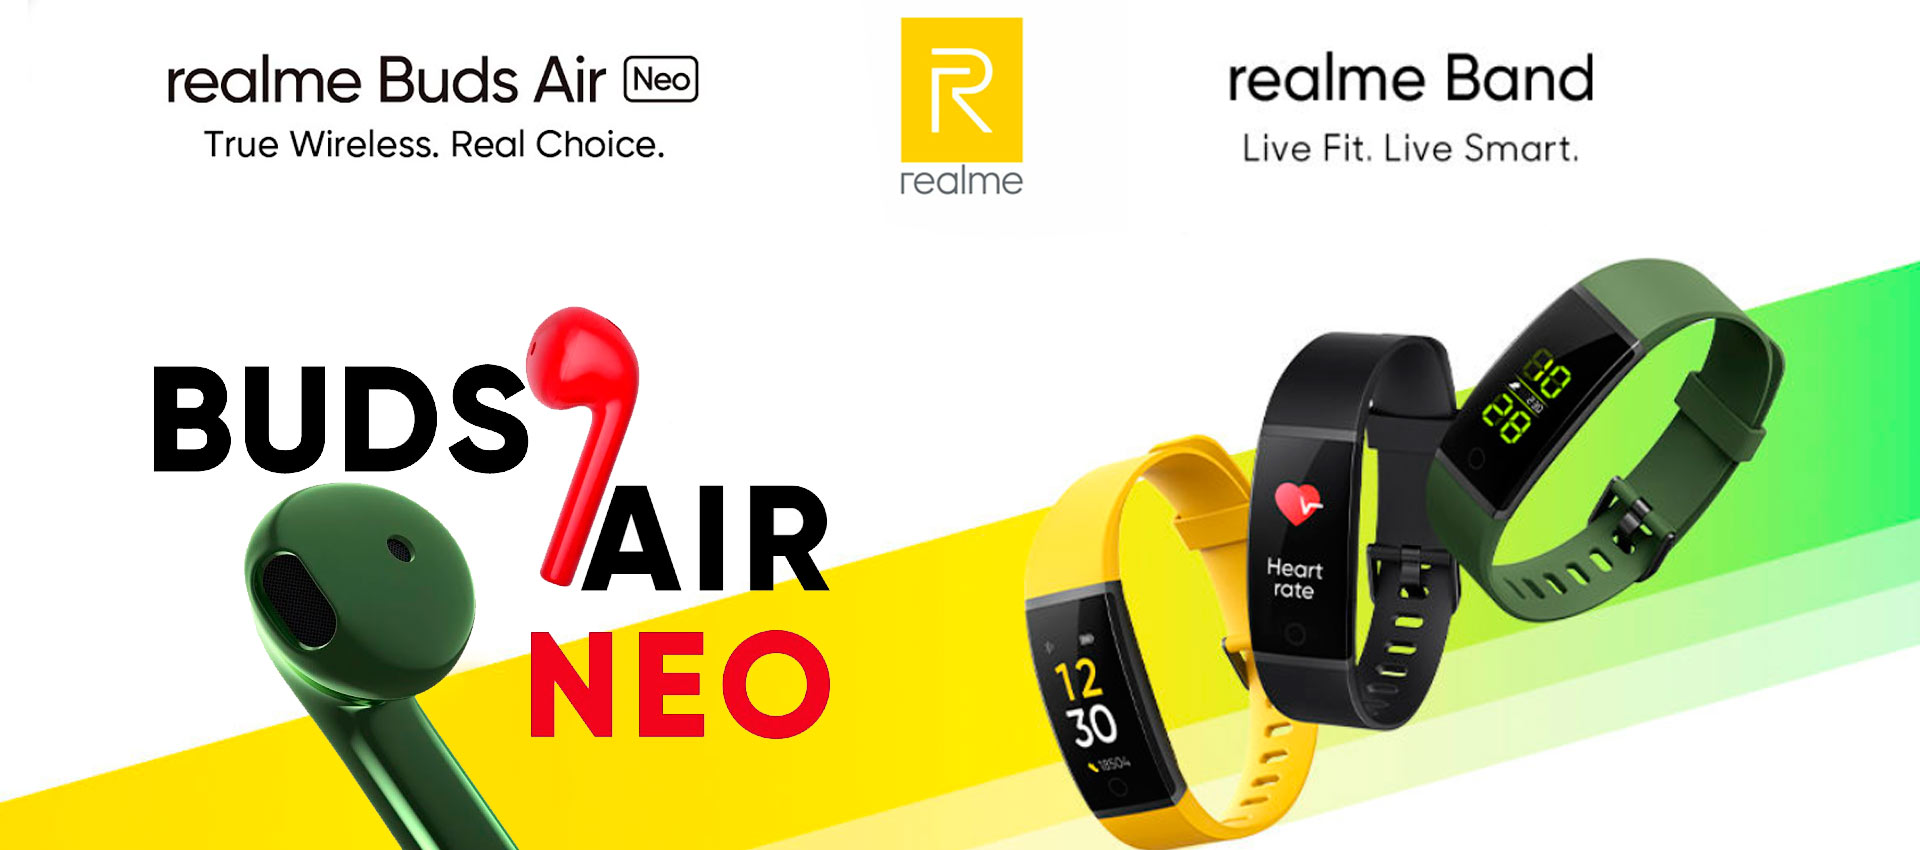 Realme Exceptional Healthcare Fitness Band & Buds Air Neo Launched in Pakistan